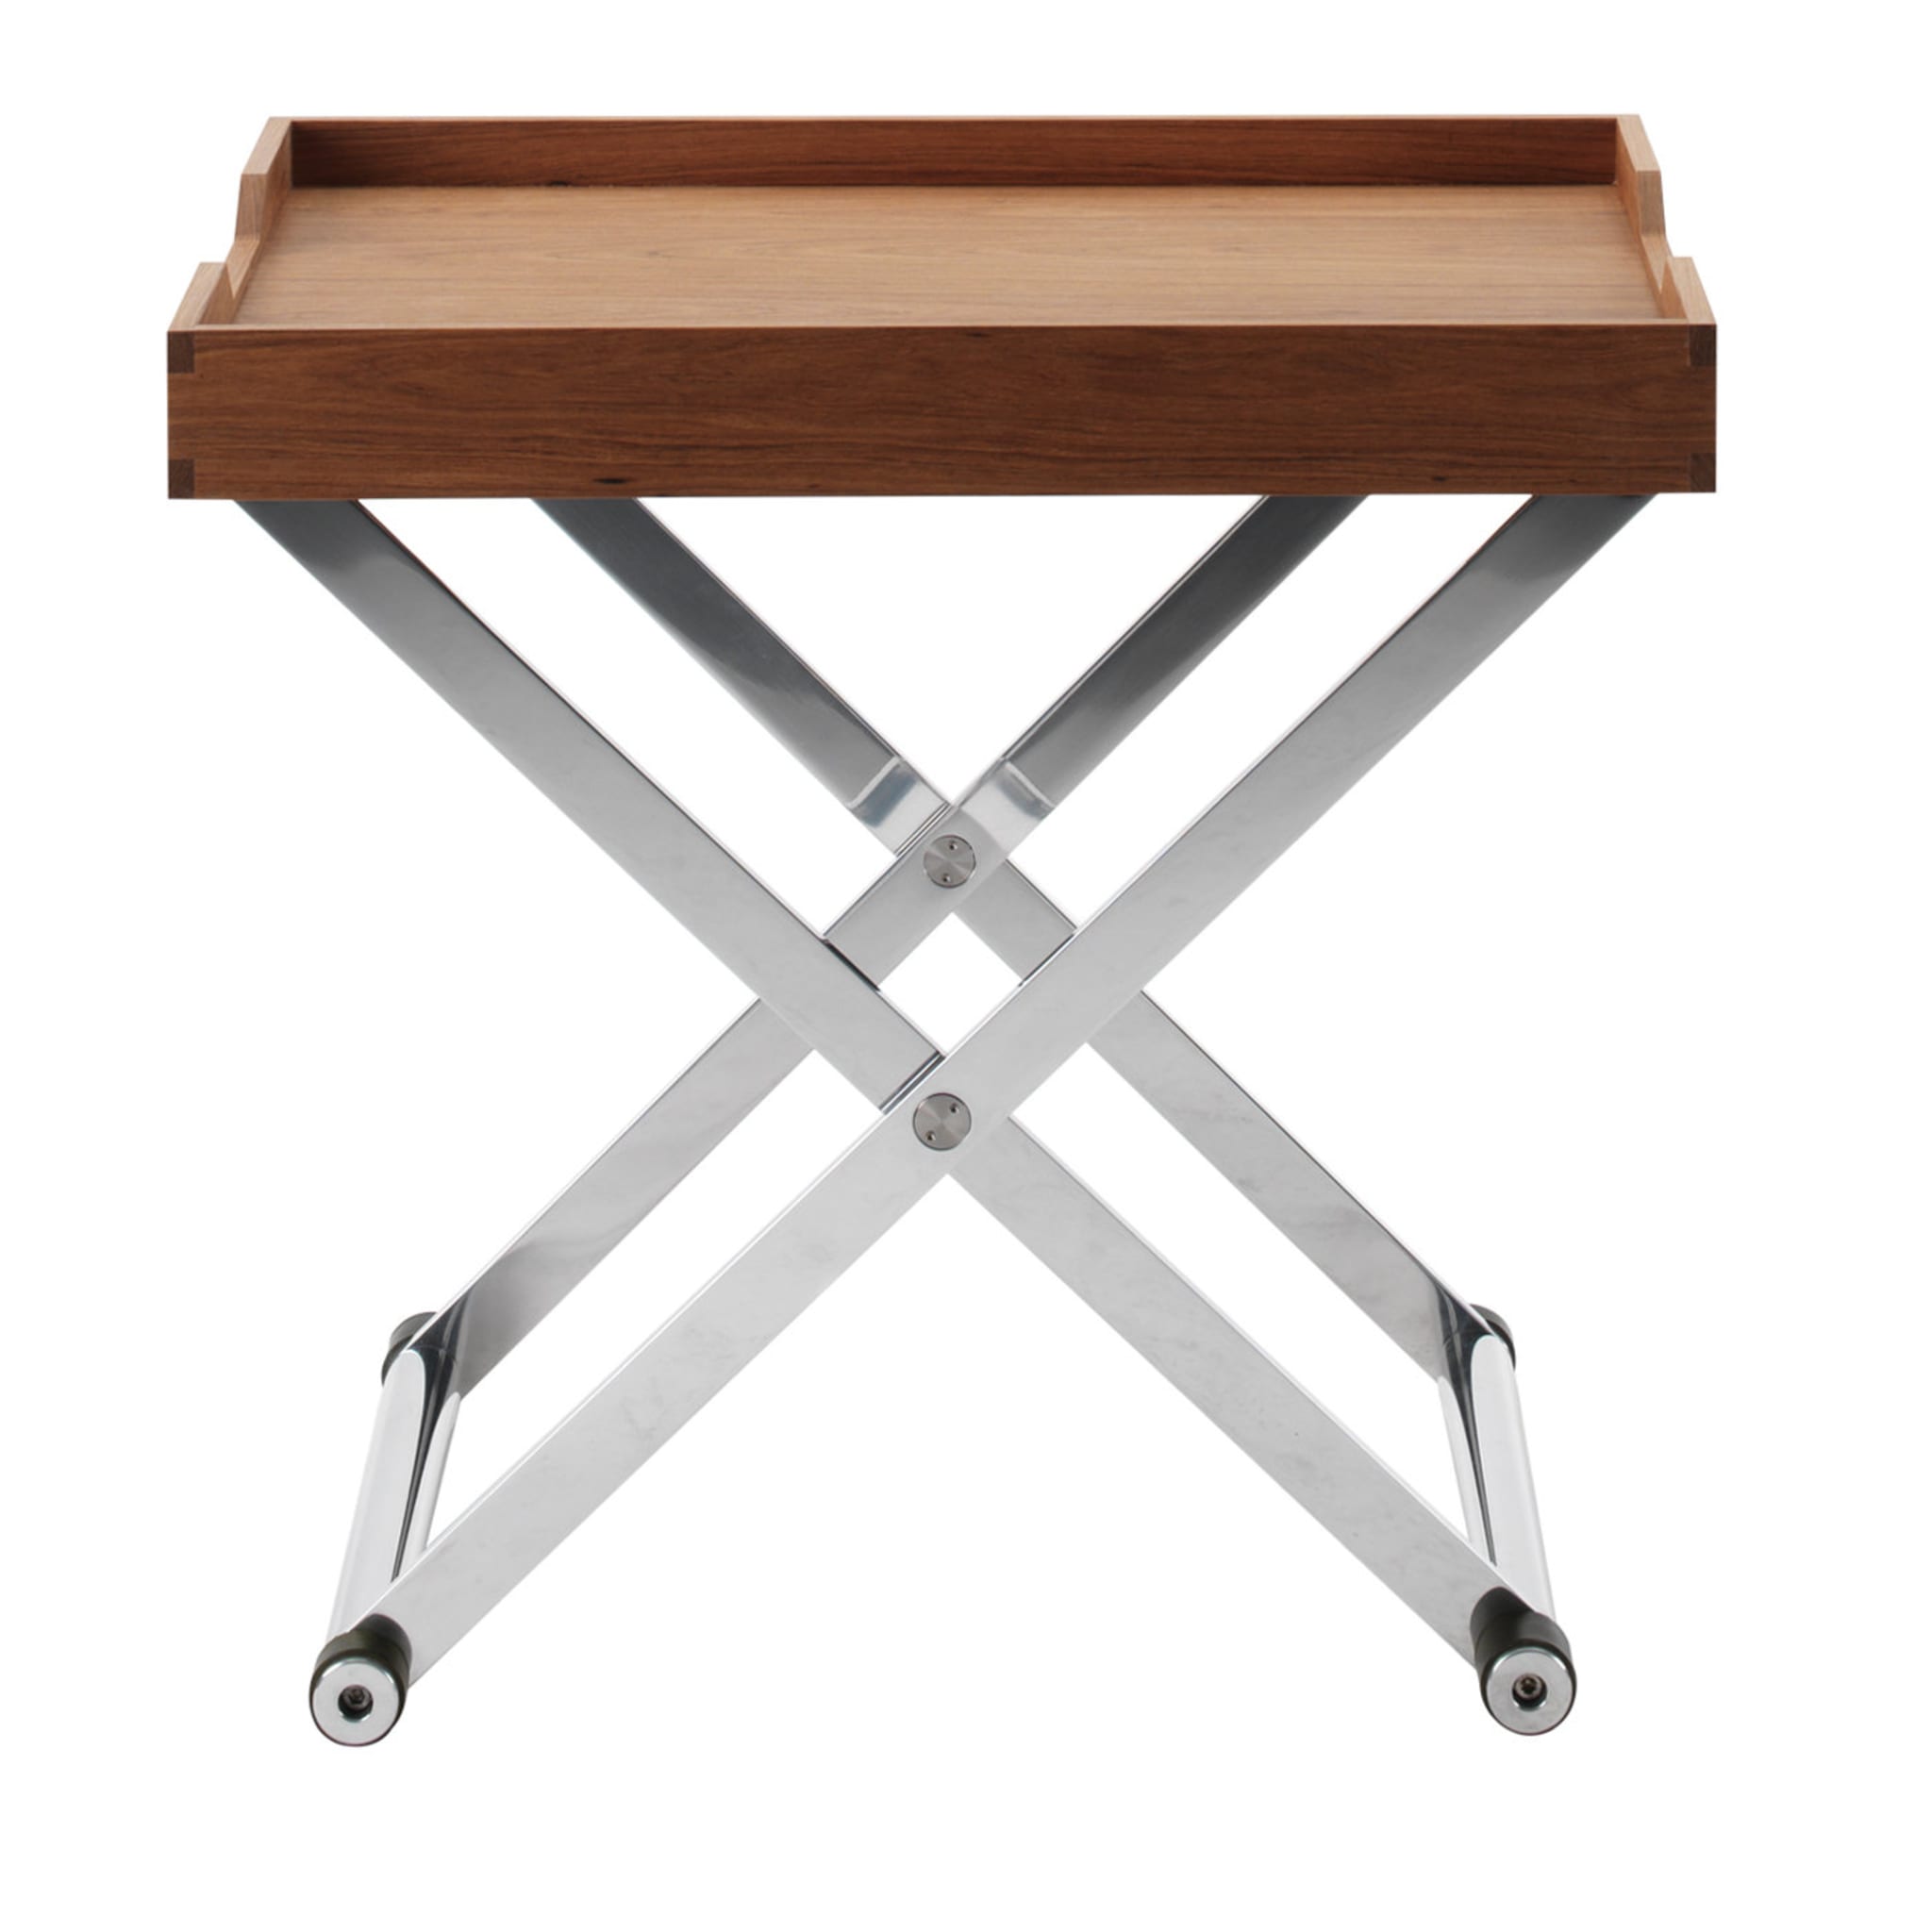 Andrea Foldable Table by Enrico Tonucci - Main view